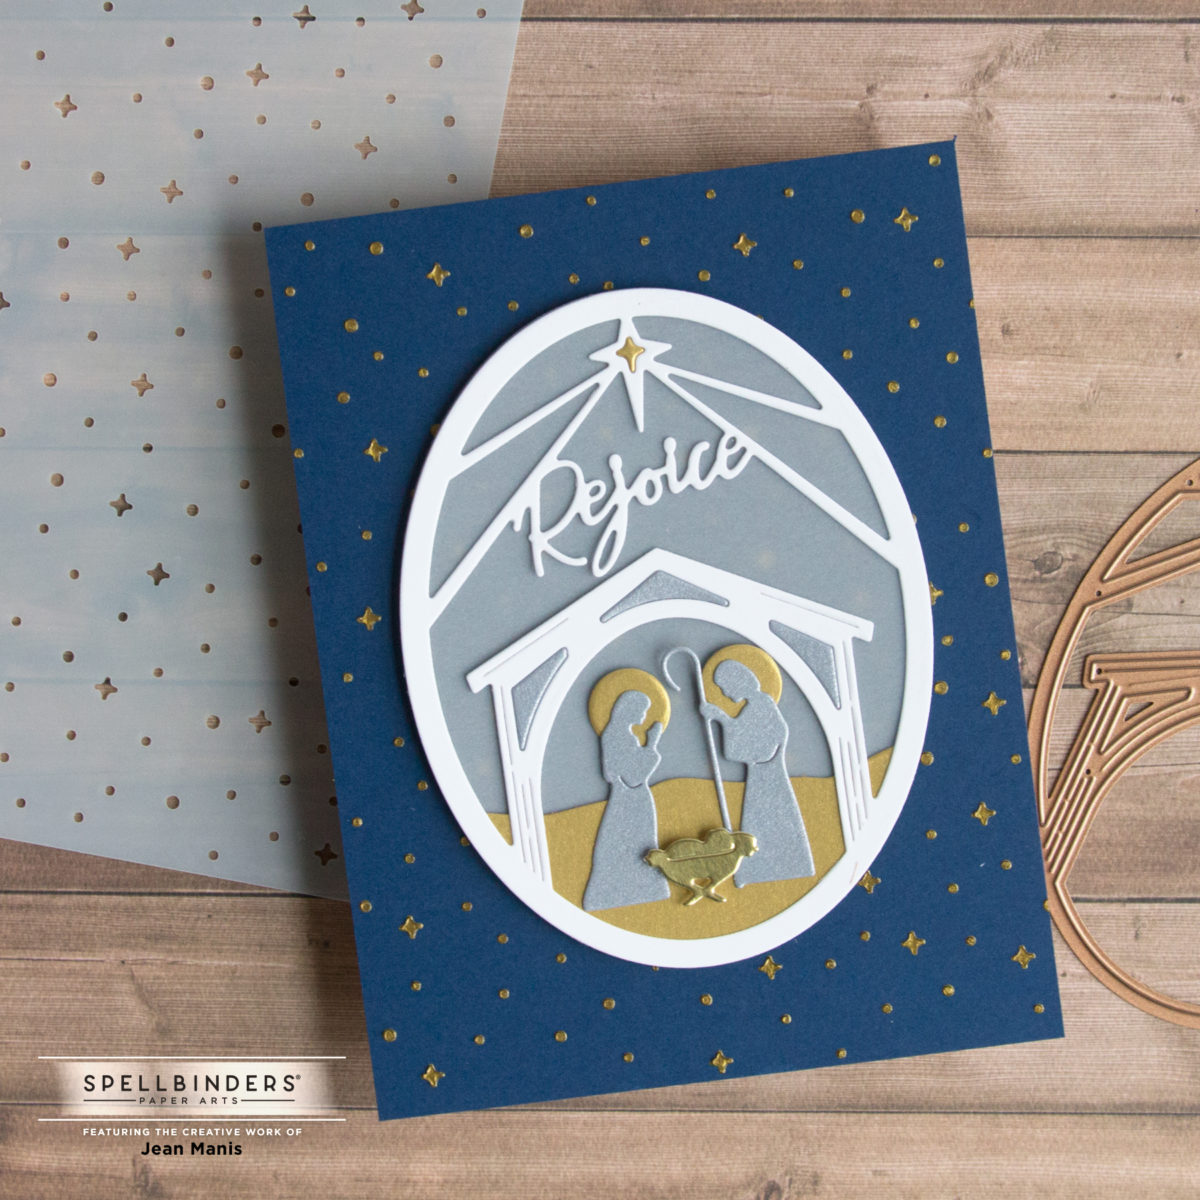 Spellbinders Christmas Traditions – Another Take on the Nativity